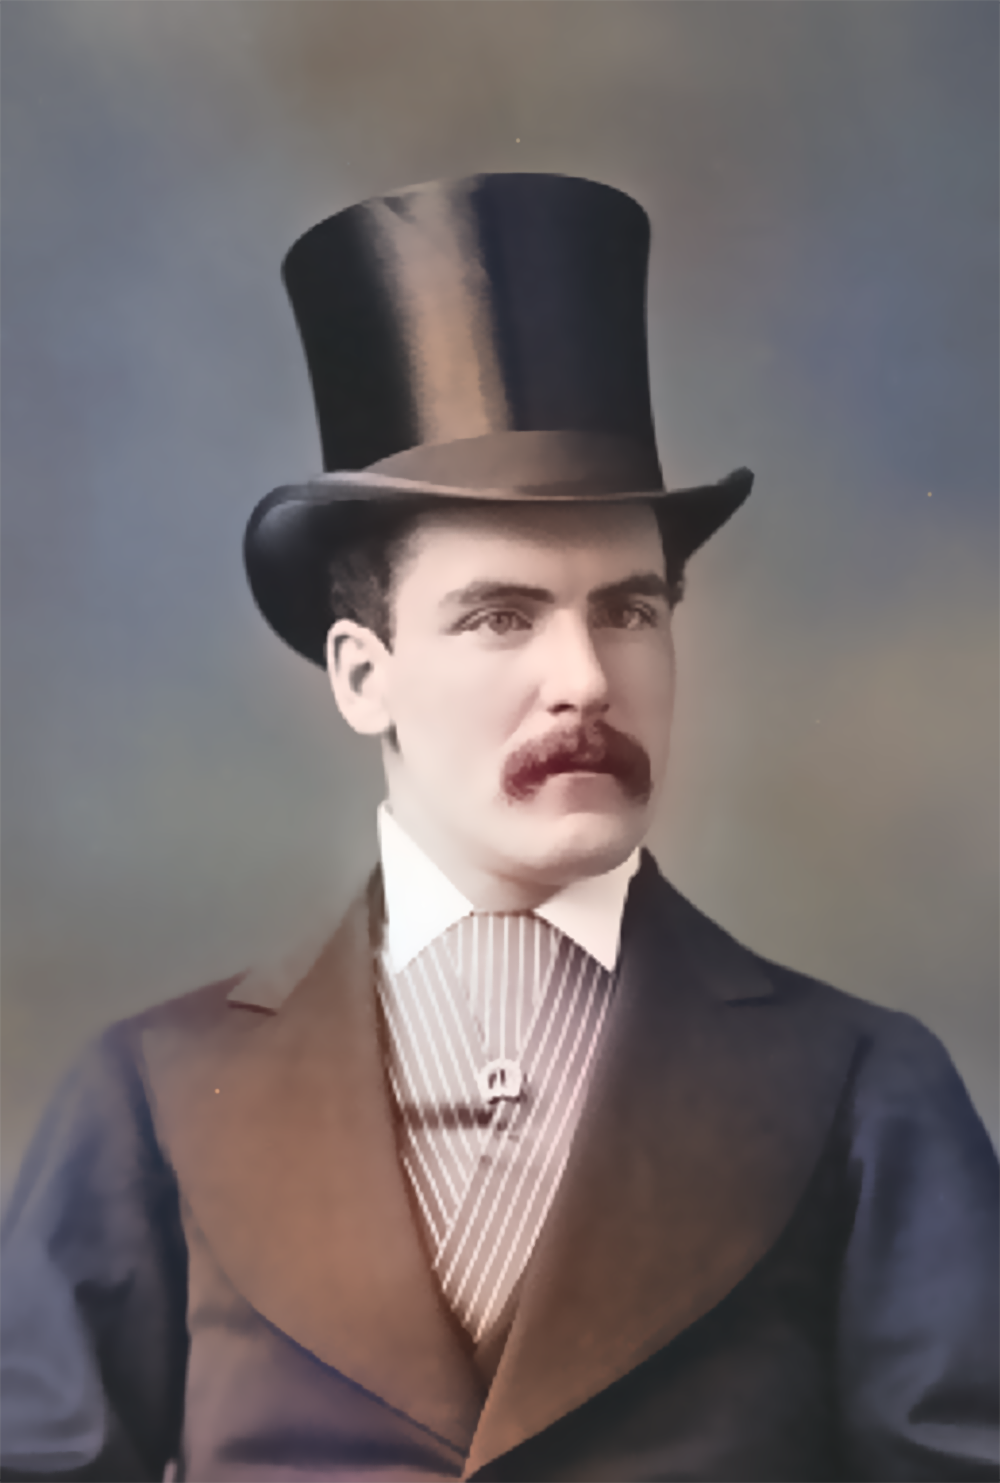 The image shows a man wearing a top hat and a black suit. He has a confident expression on his face.